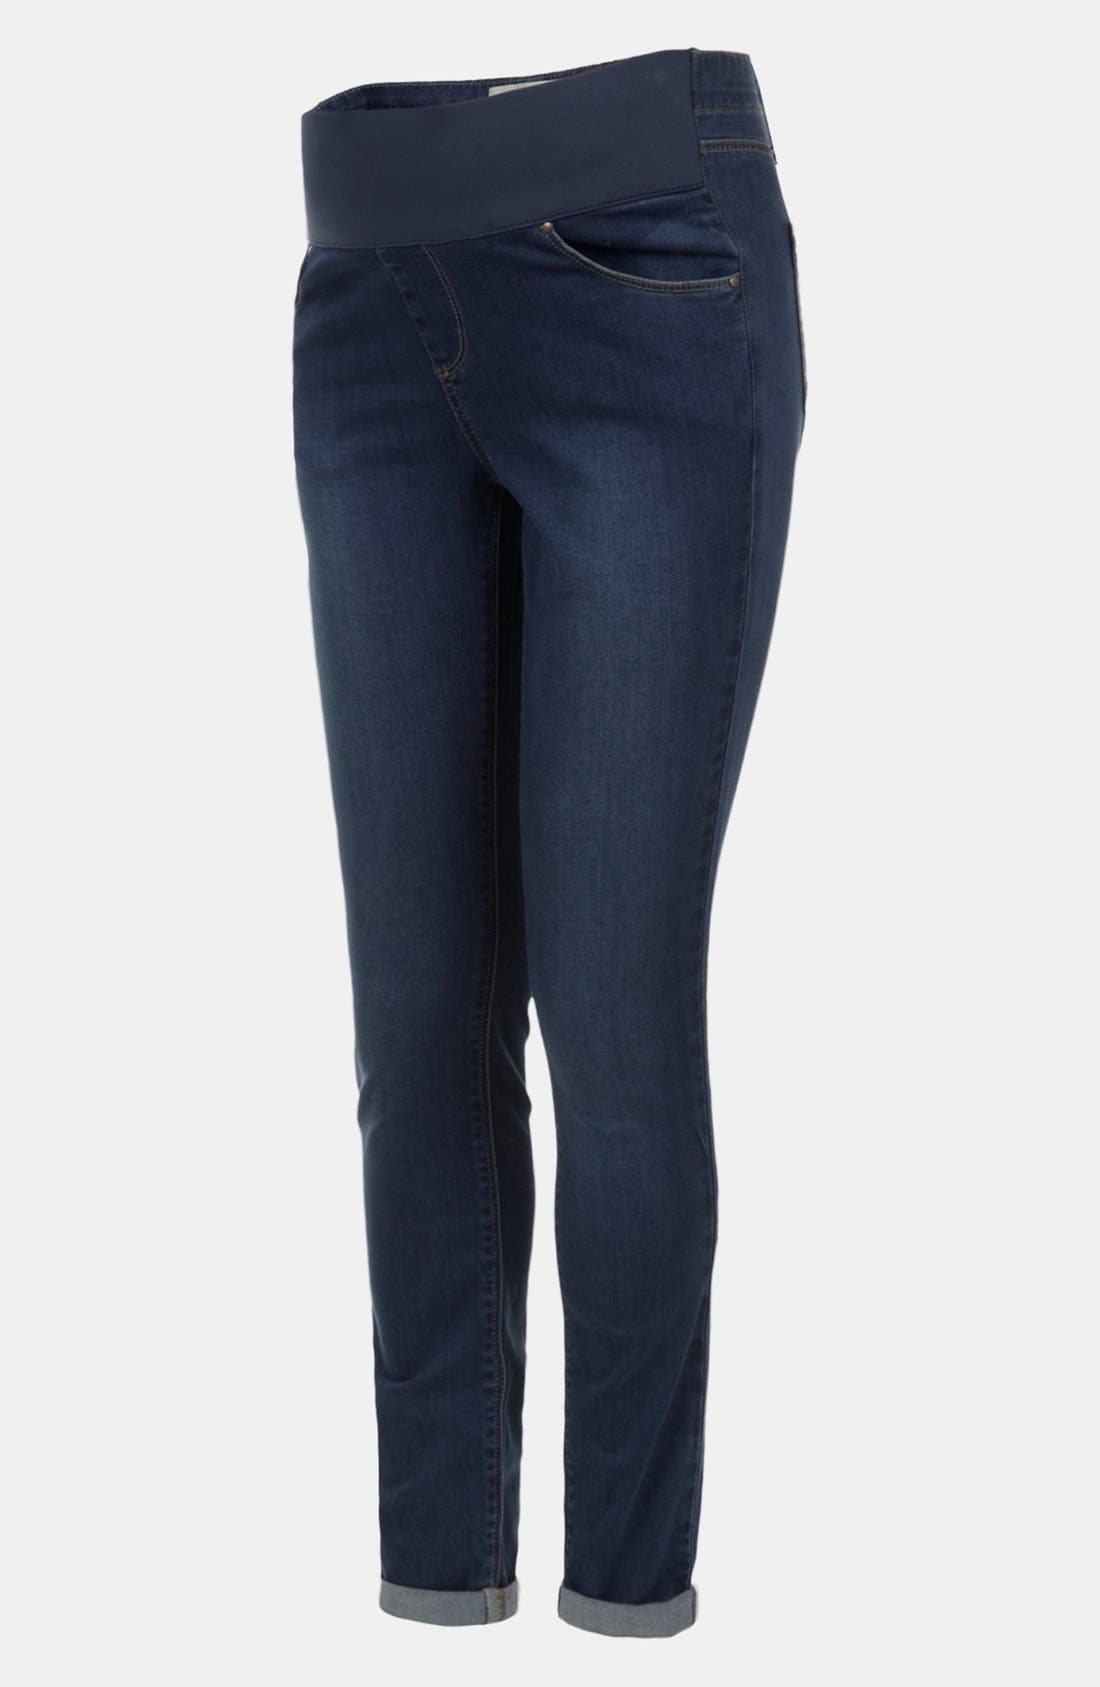 Topshop 'Leigh' Maternity Jeans | Nordstrom